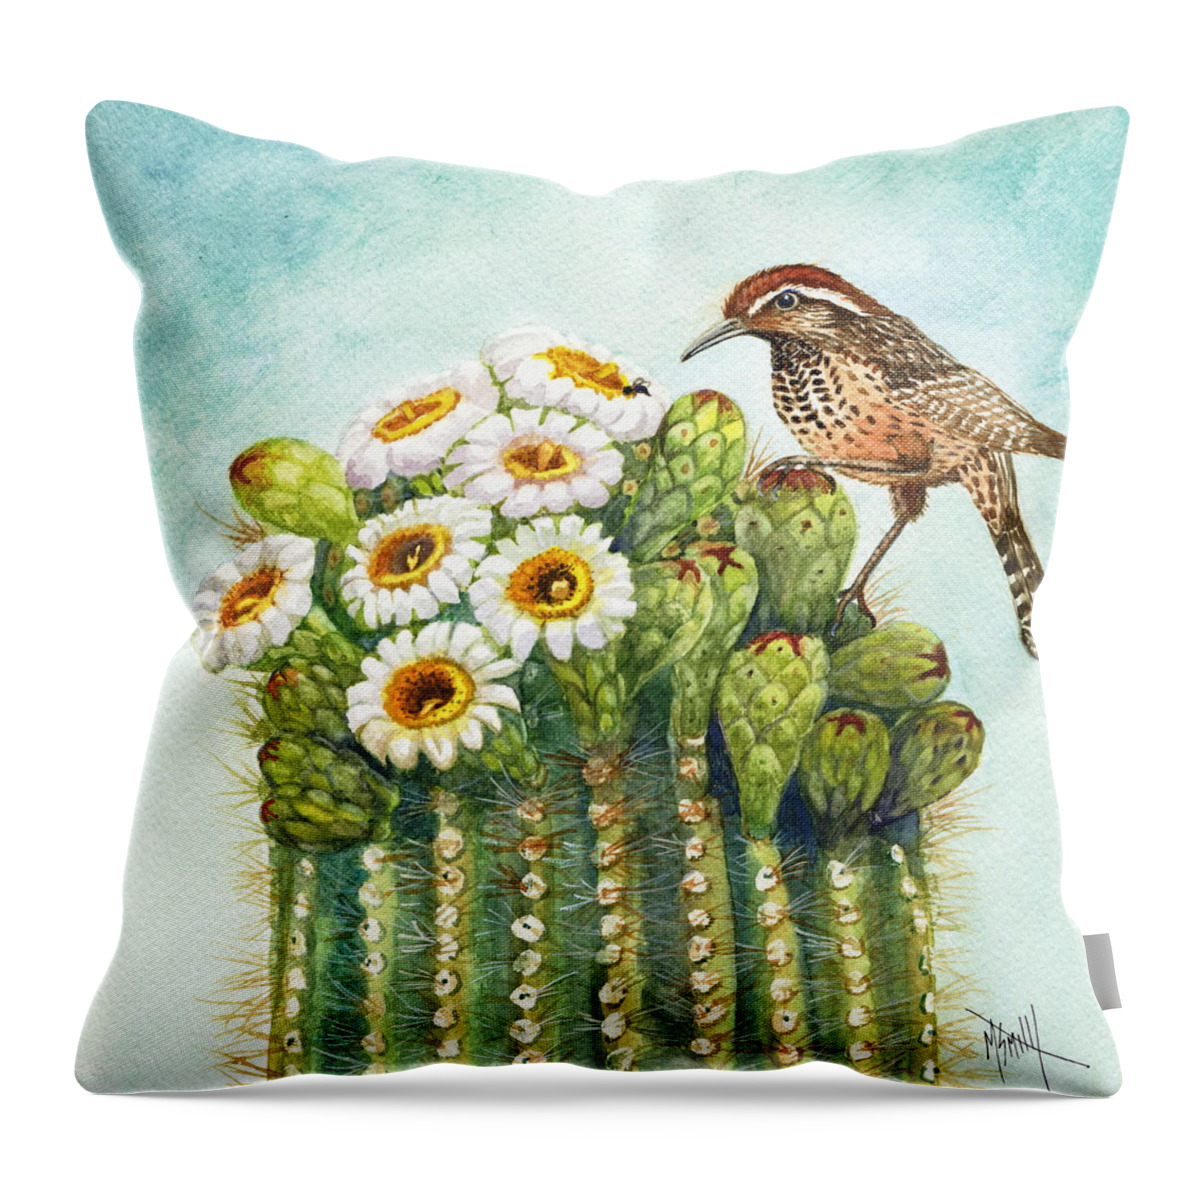 Cactus Wren Throw Pillow featuring the painting Cactus Wren and Saguaro by Marilyn Smith